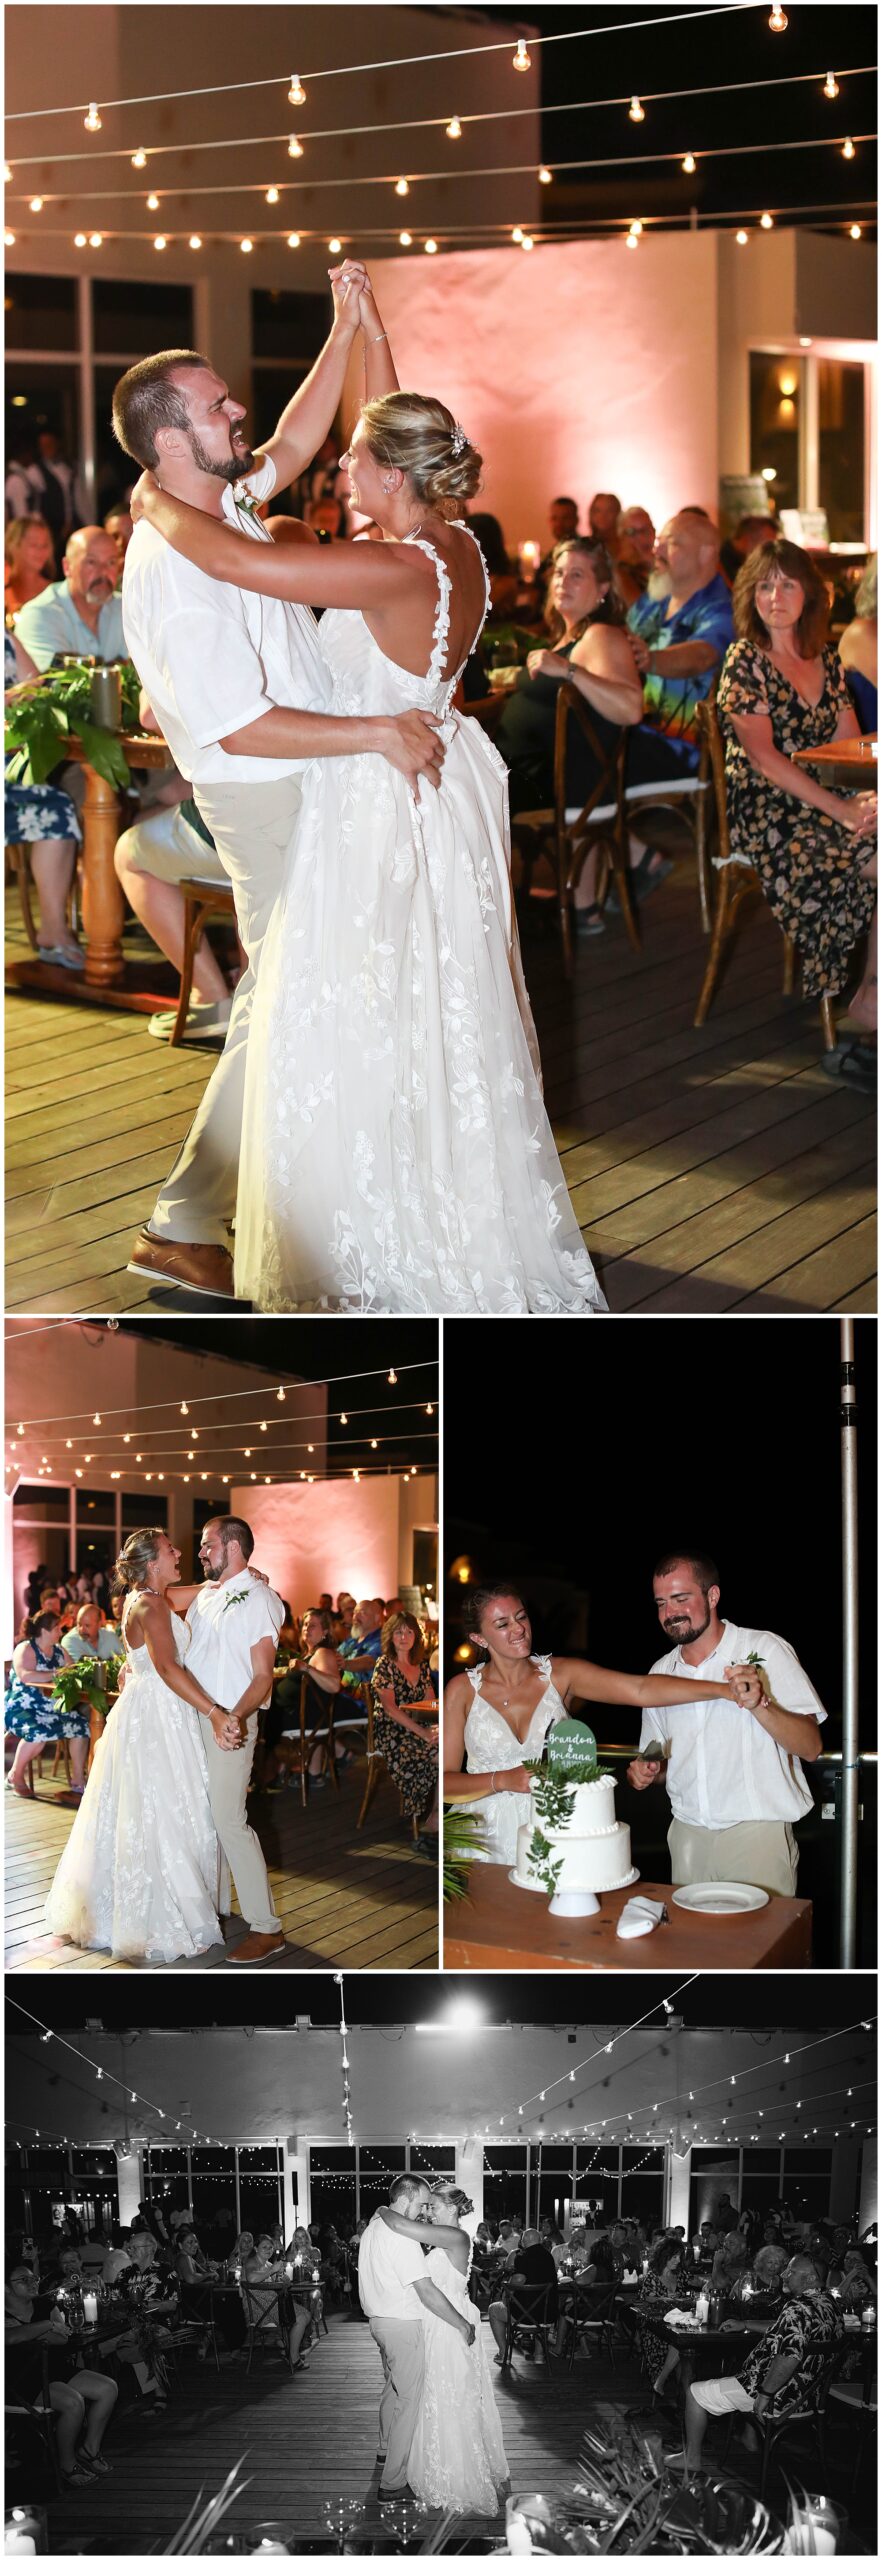 First dances, at outdoor rooftop reception in the Caribbean 